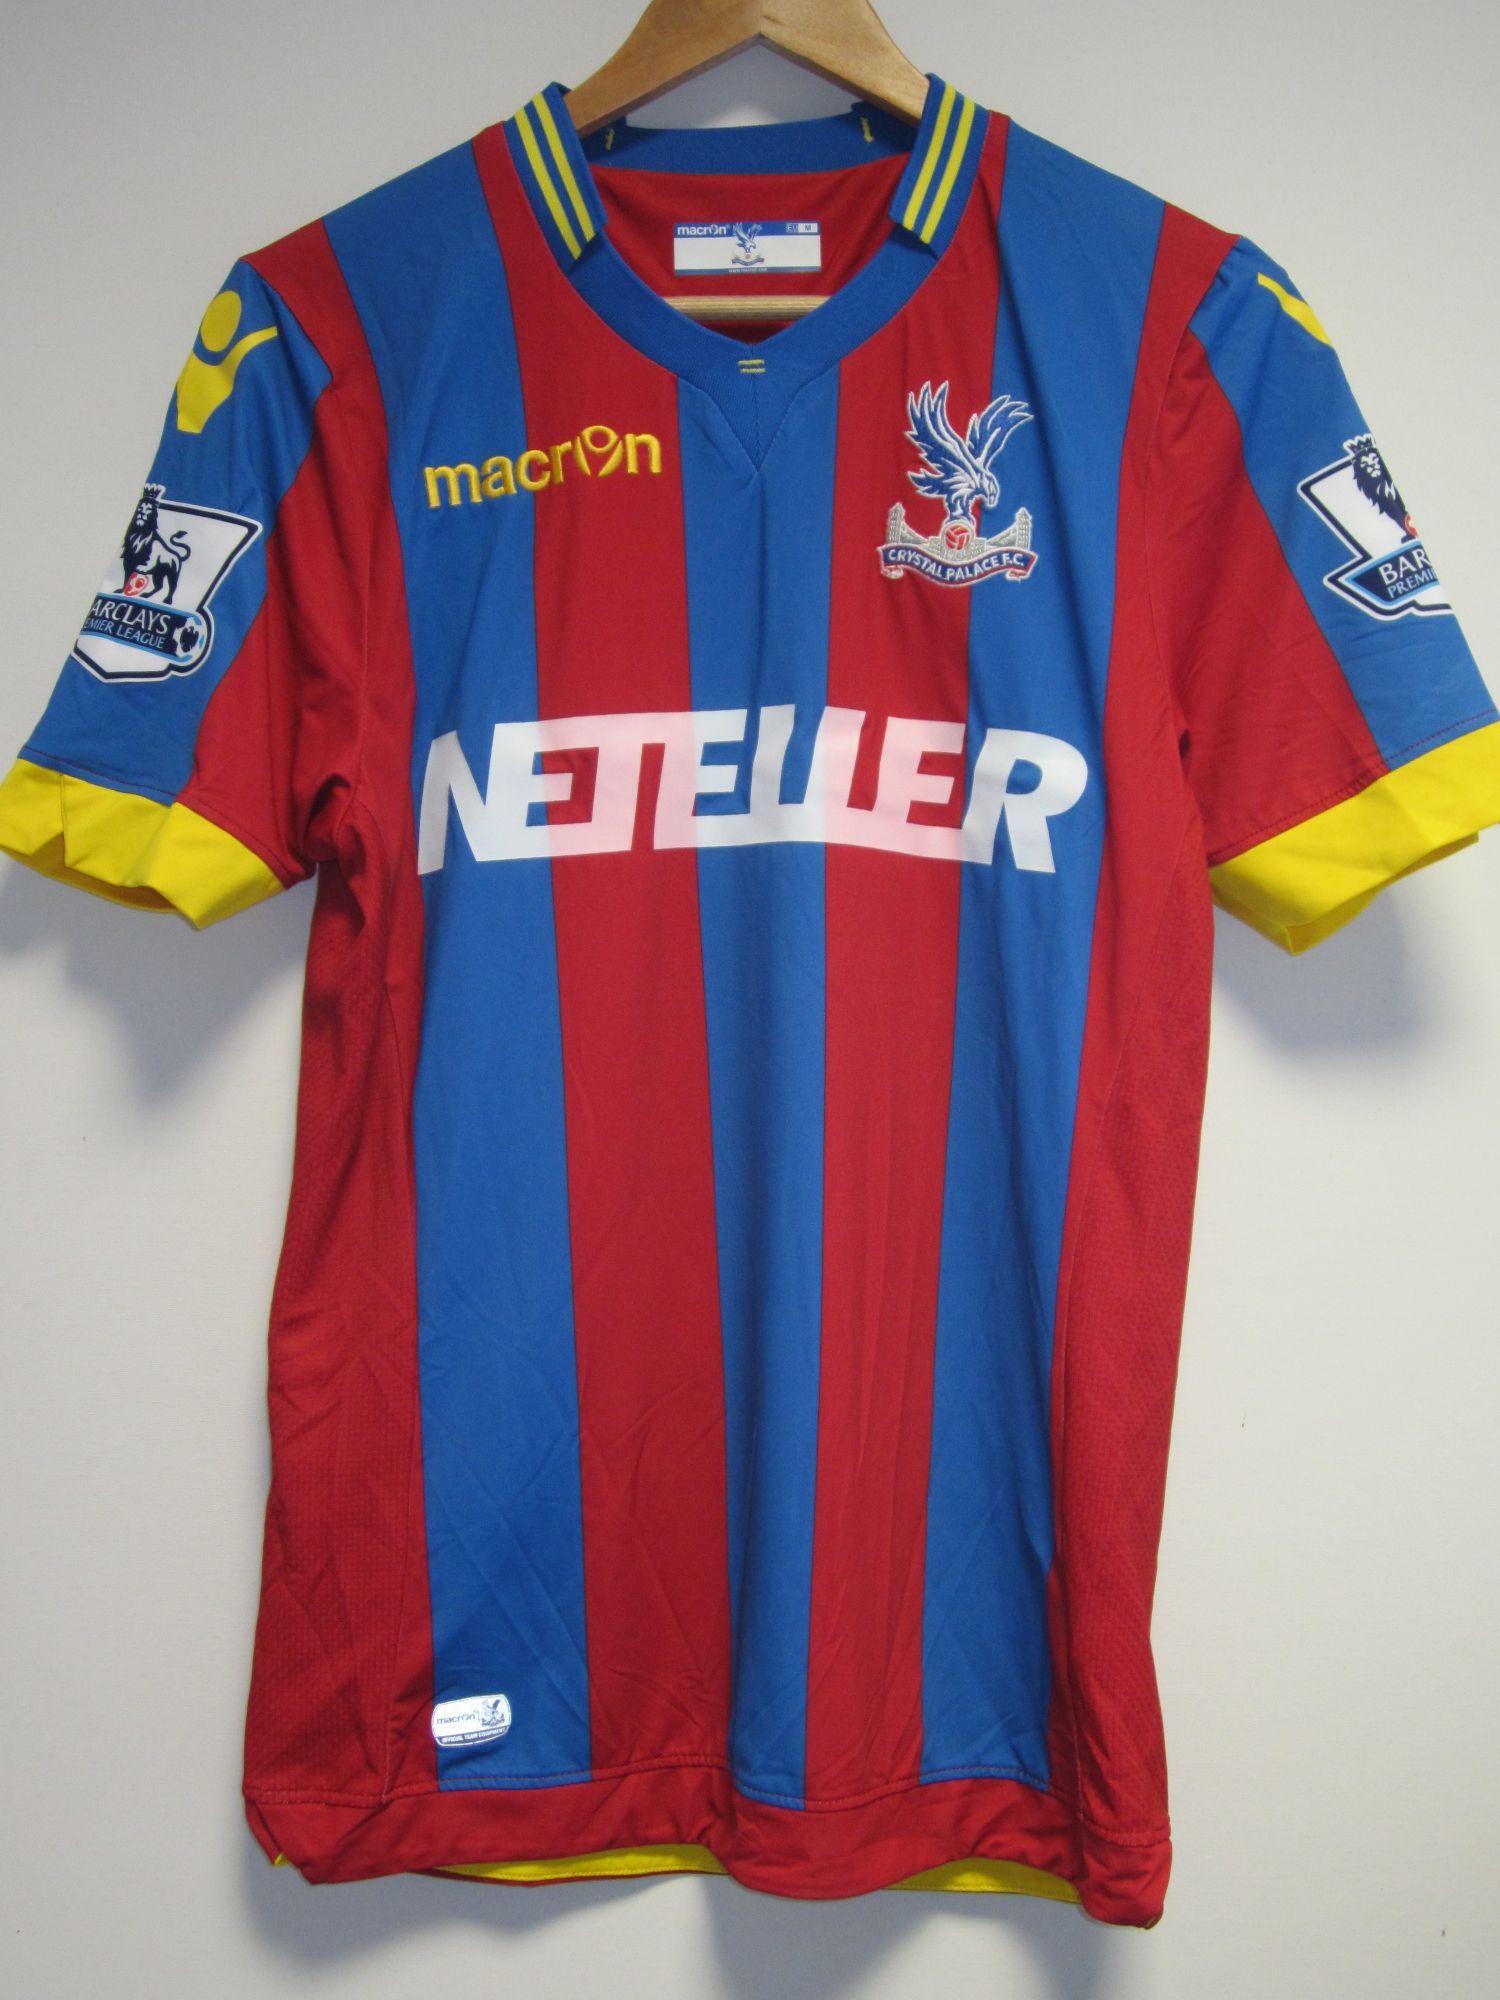 MATCH WORN SHIRT / ADLENE GUEDIOURA / CRYSTAL PALACE Blue and red stripe short sleeve shirt from